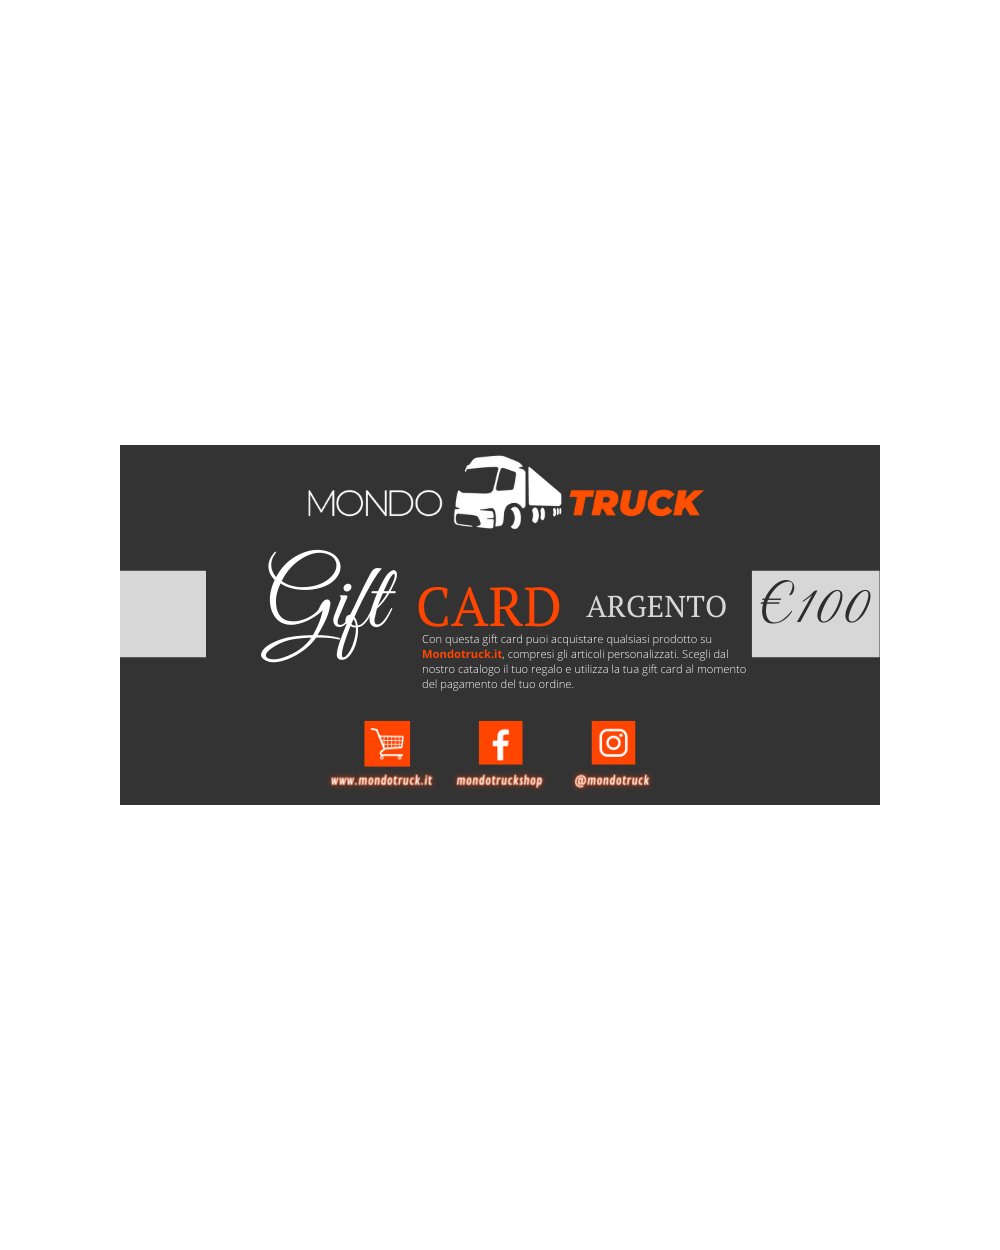 GIFT CARD ARGENTO €100